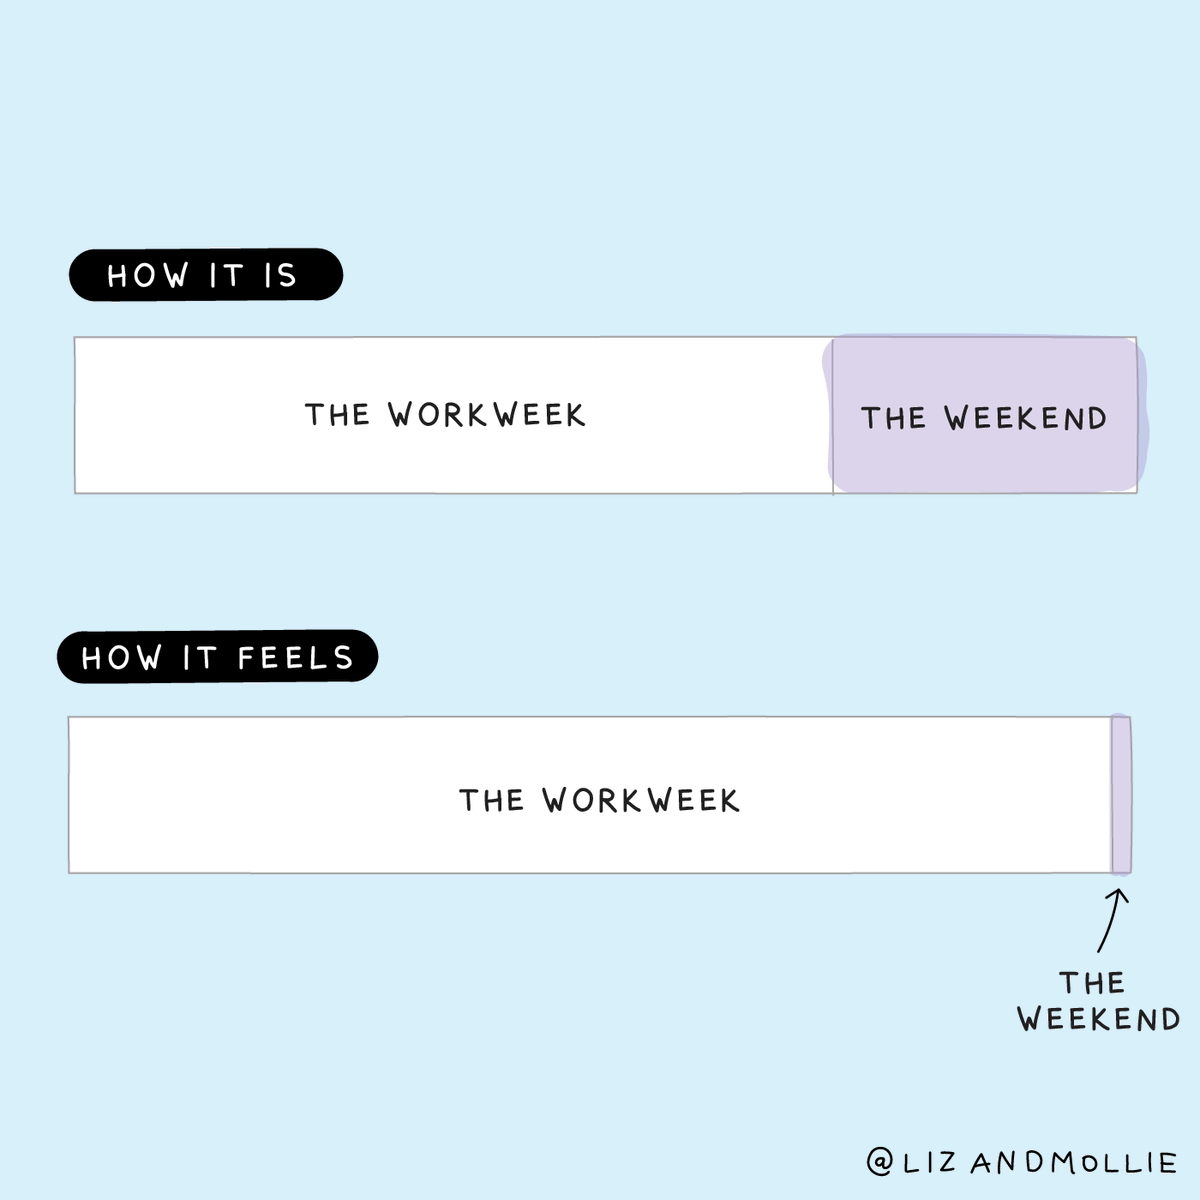 A cartoon of 2 stacked bar charts, composed of a bar labeled "The workweek" and a bar labelled "The weekend". The top bar is titled "How it is", the bottom one is titled "How it feels". In the bottom one the bar for the weekend is much smaller